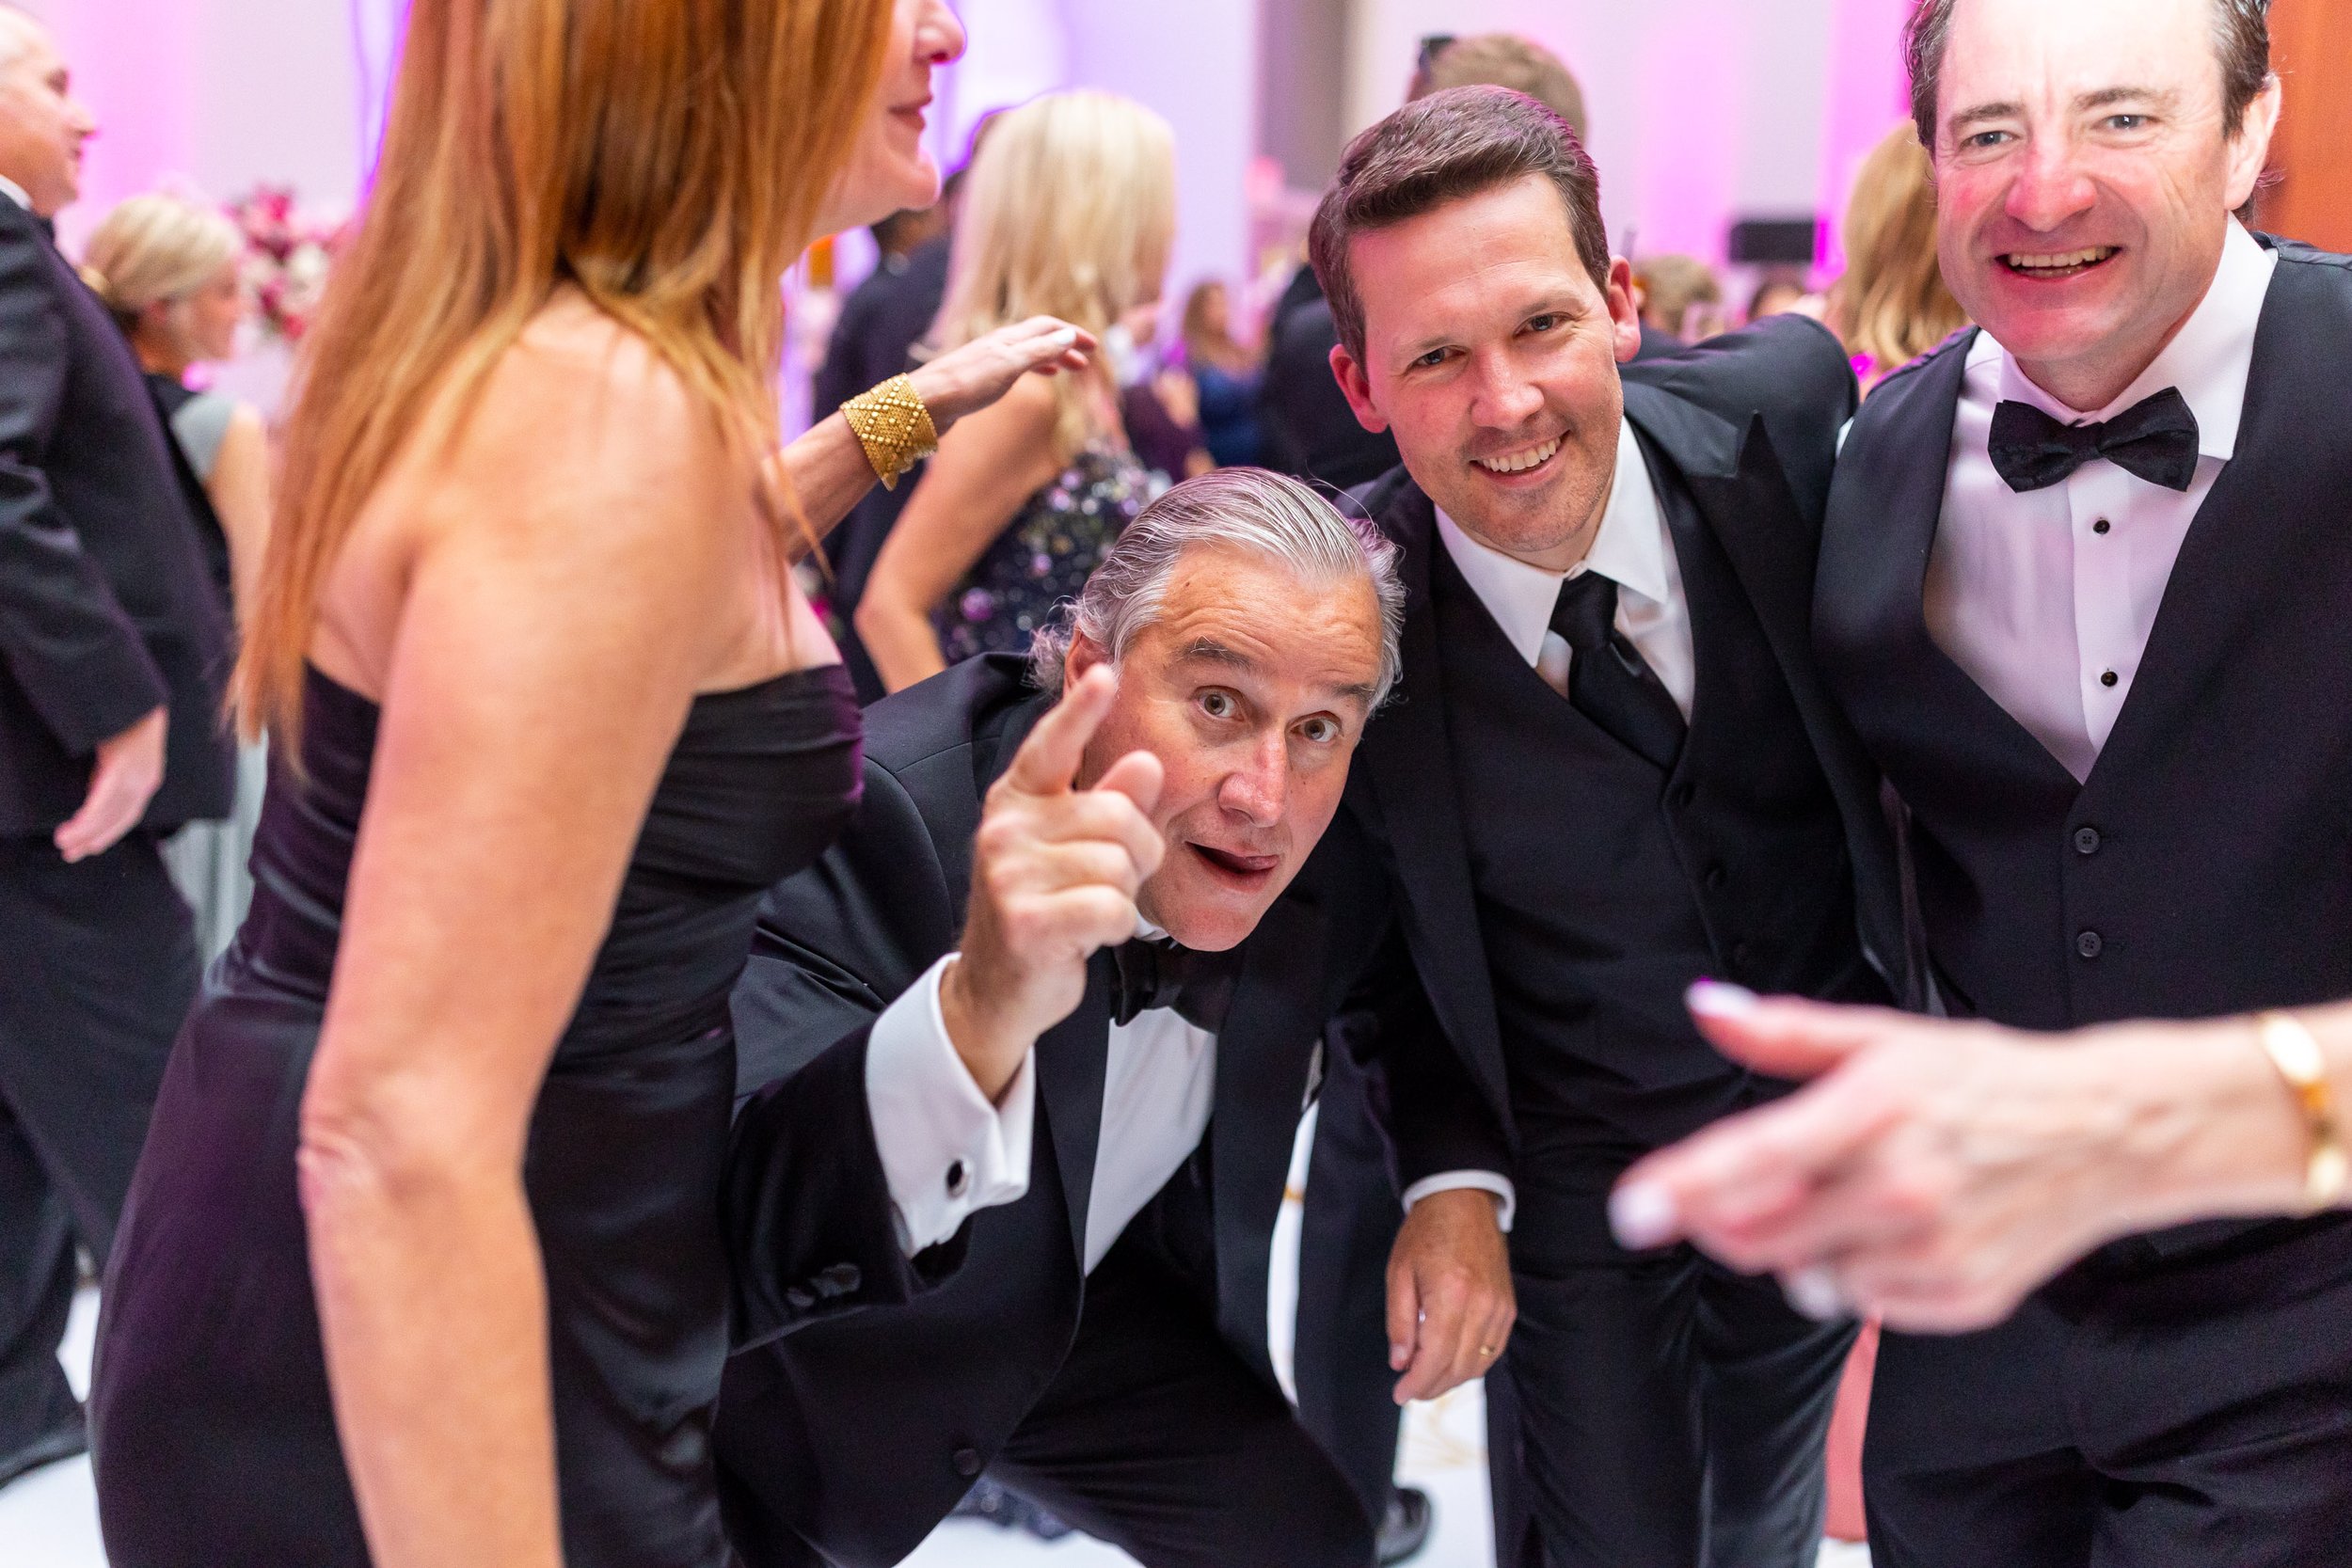 Funny and candid wedding guest photos at Capital One Hall 